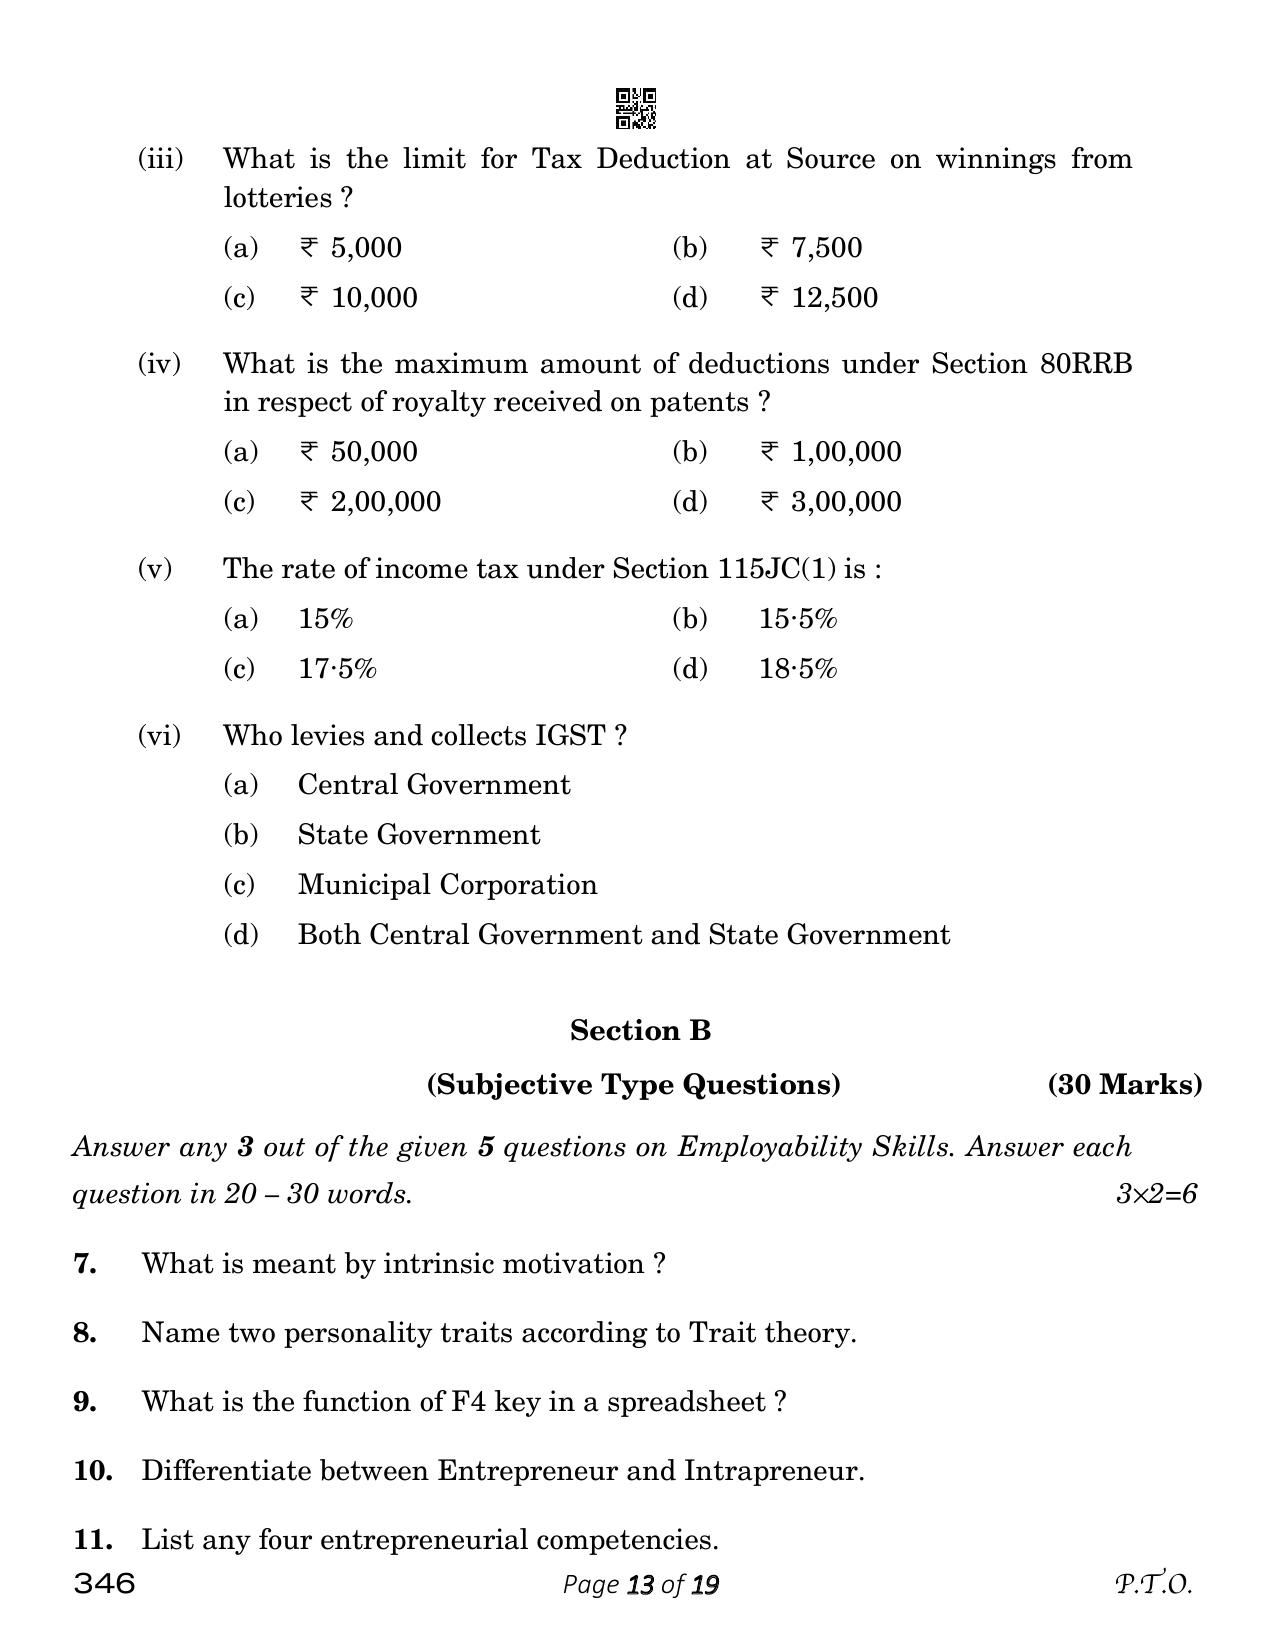 CBSE Class 12 Taxation (Compartment) 2023 Question Paper - Page 13